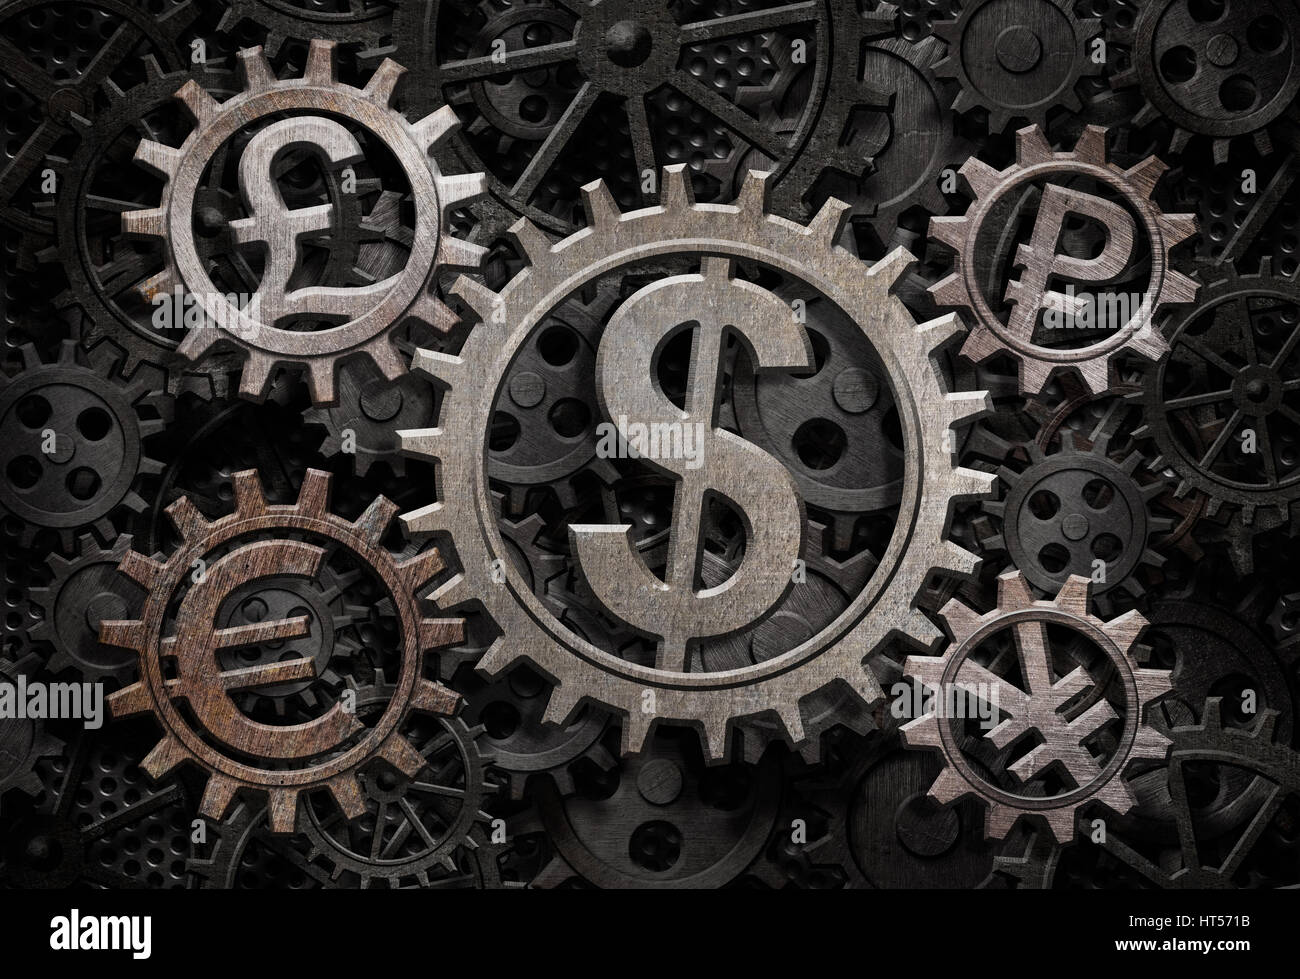 different currencies working gears 3d illustration Stock Photo